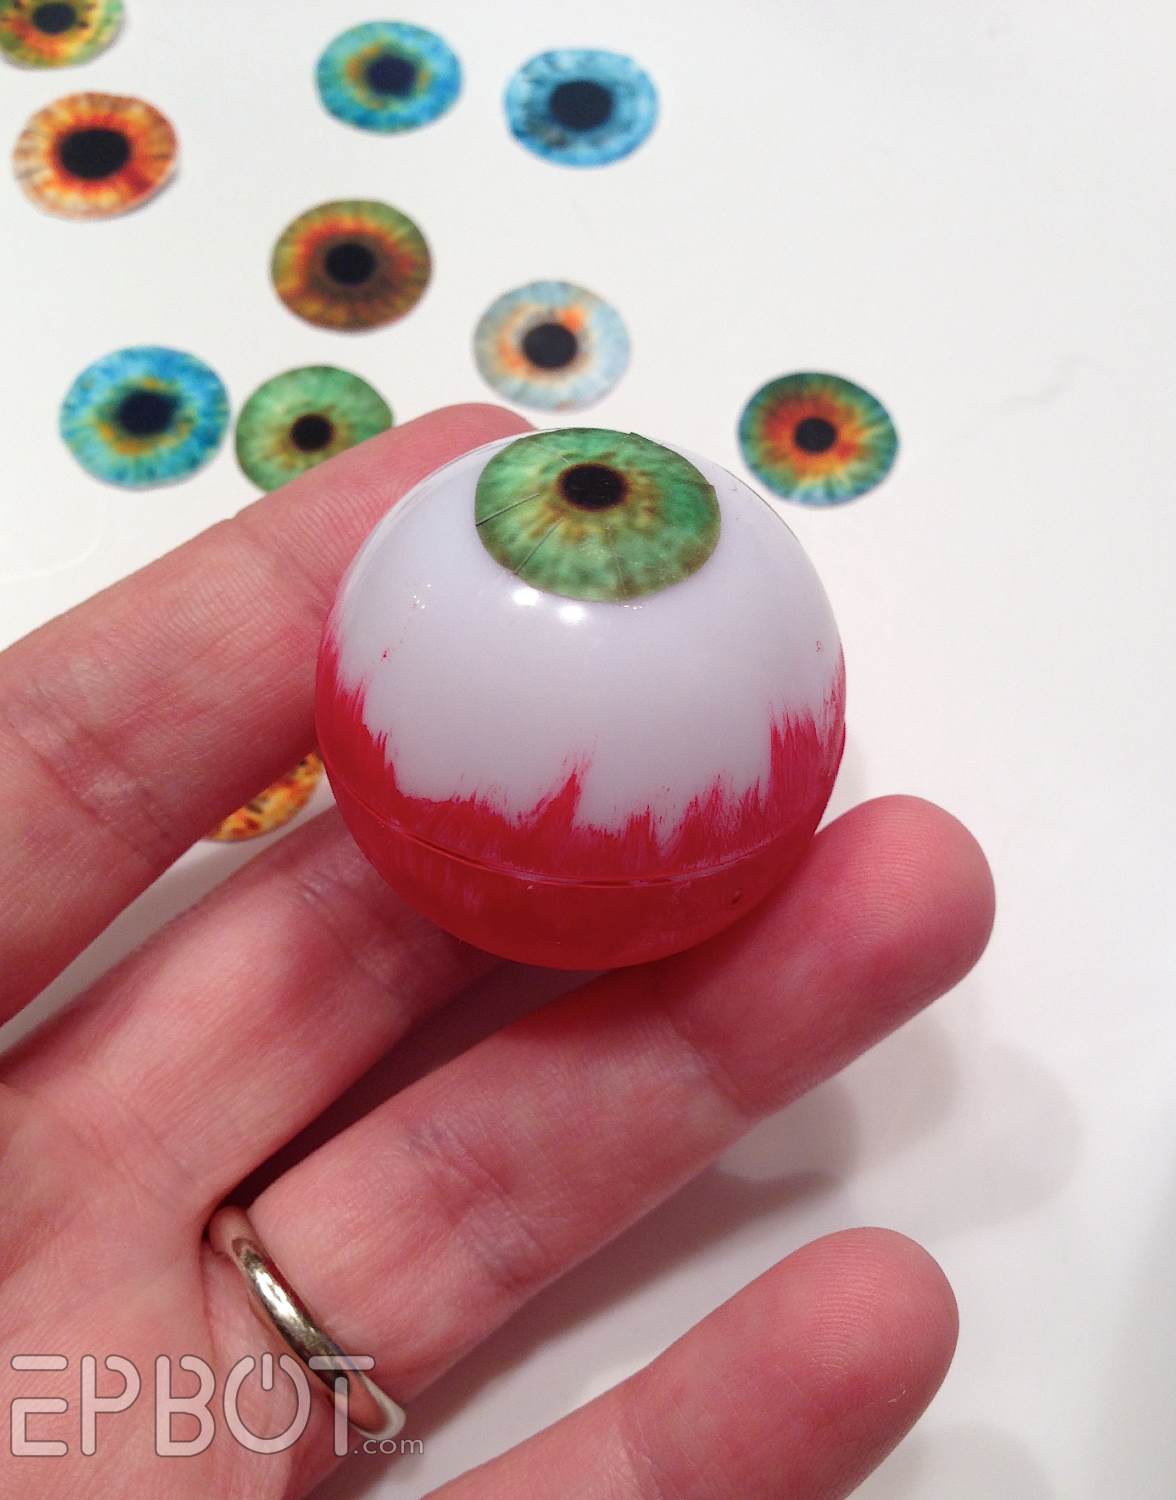 Realistic Eyeballs - created with paint, decoupage yarn fibers applied to  ping pong balls -…